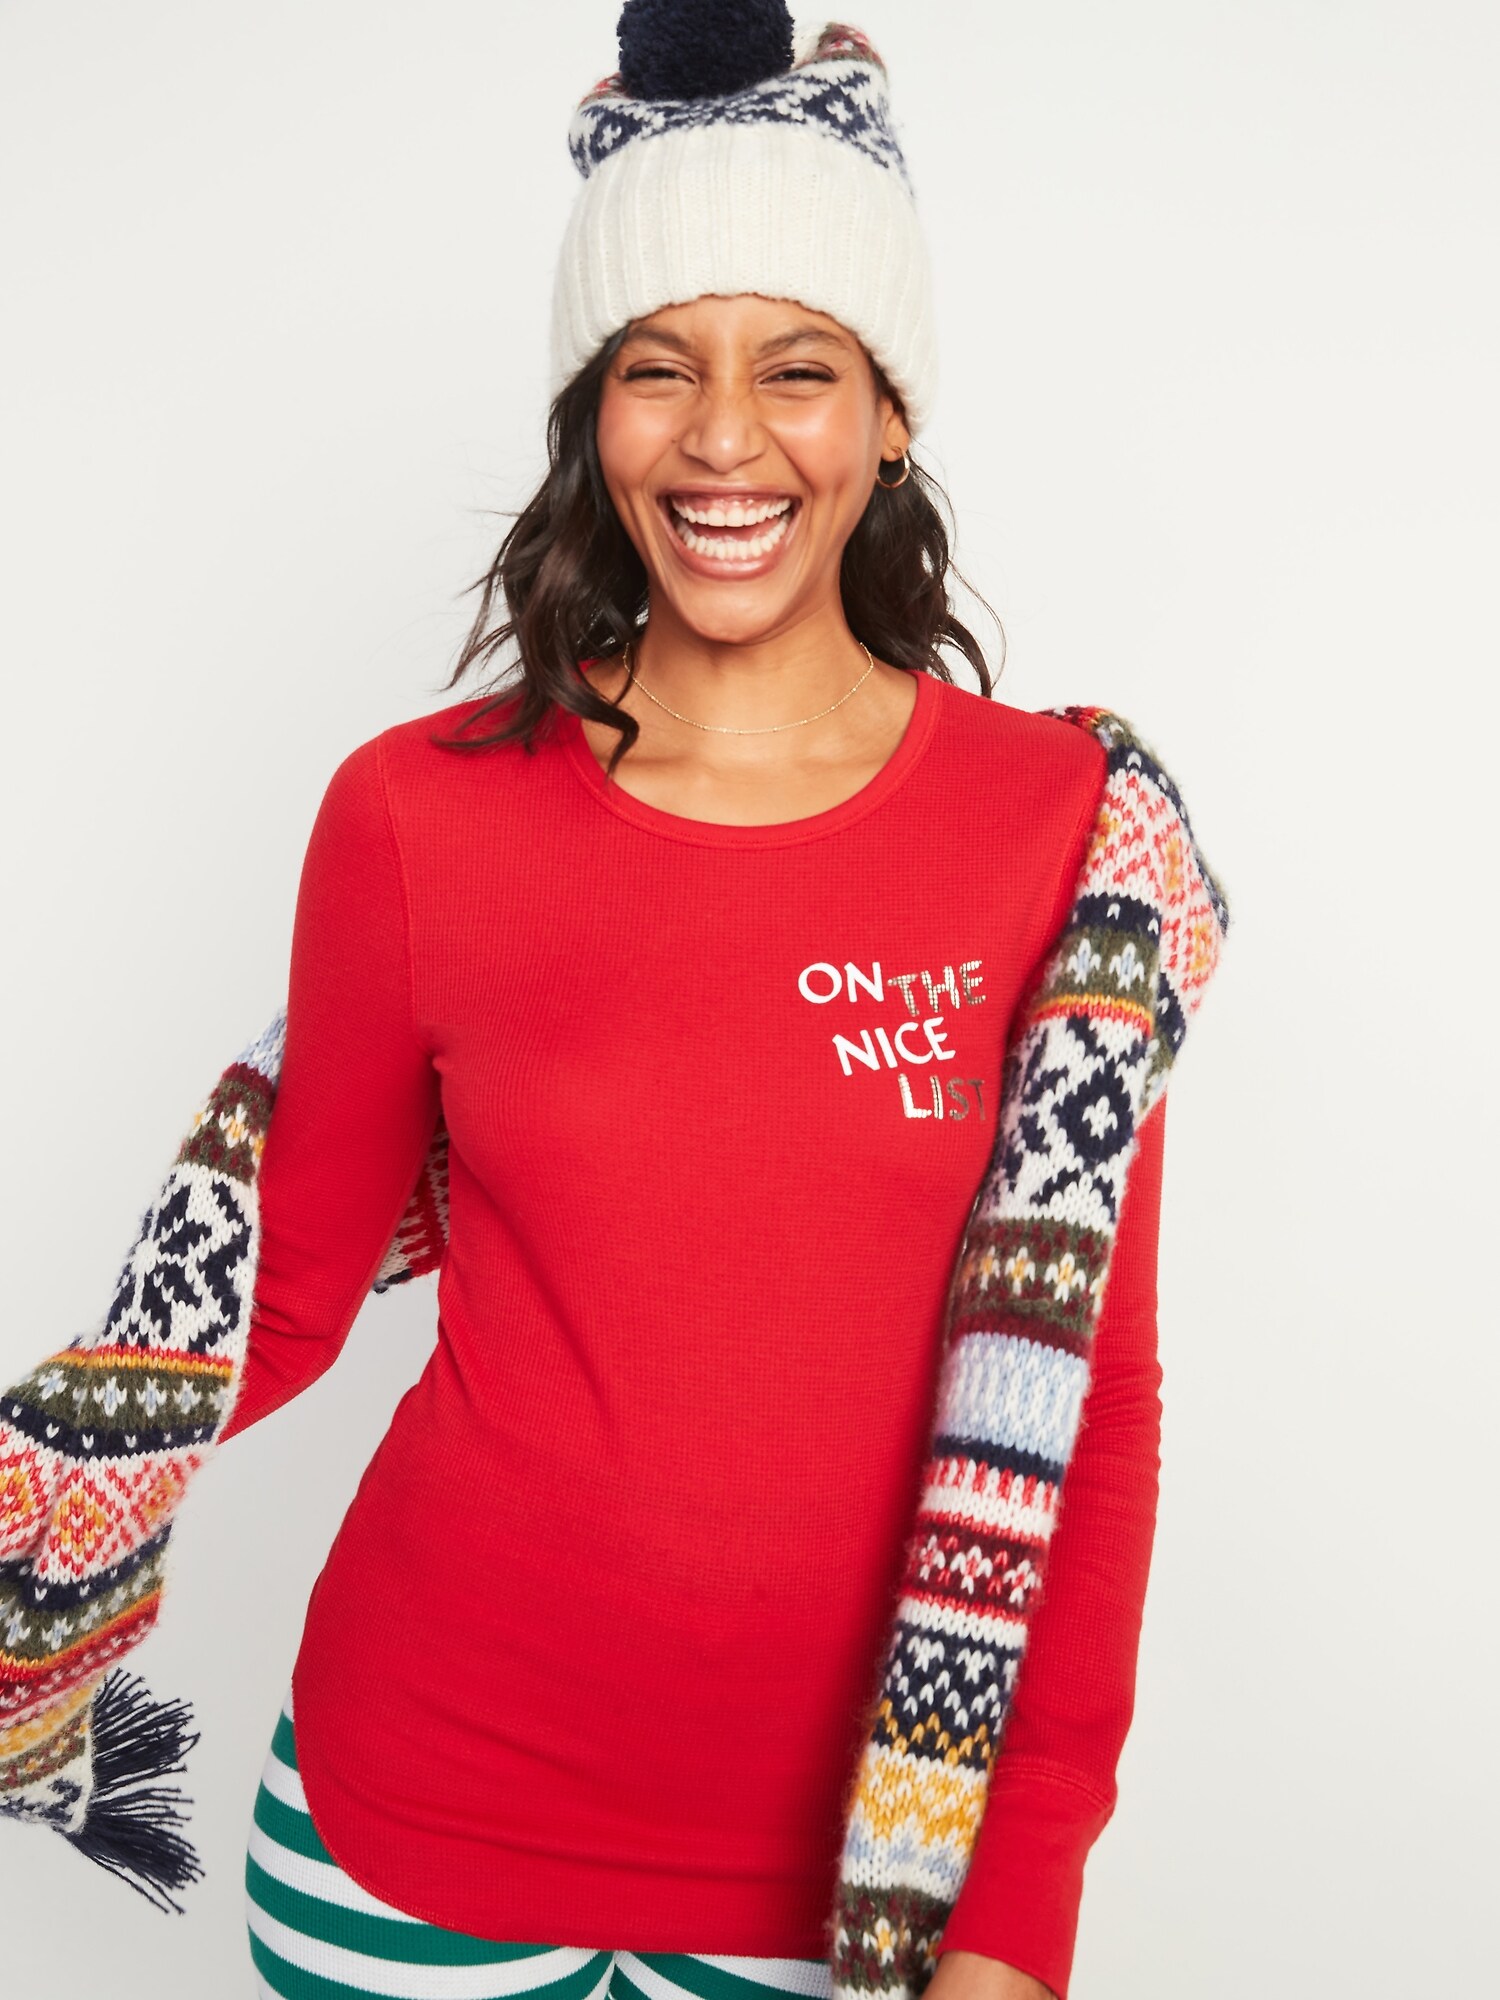 Holiday Gift Styles: Old Navy's Thermal Sets for 50% Off!